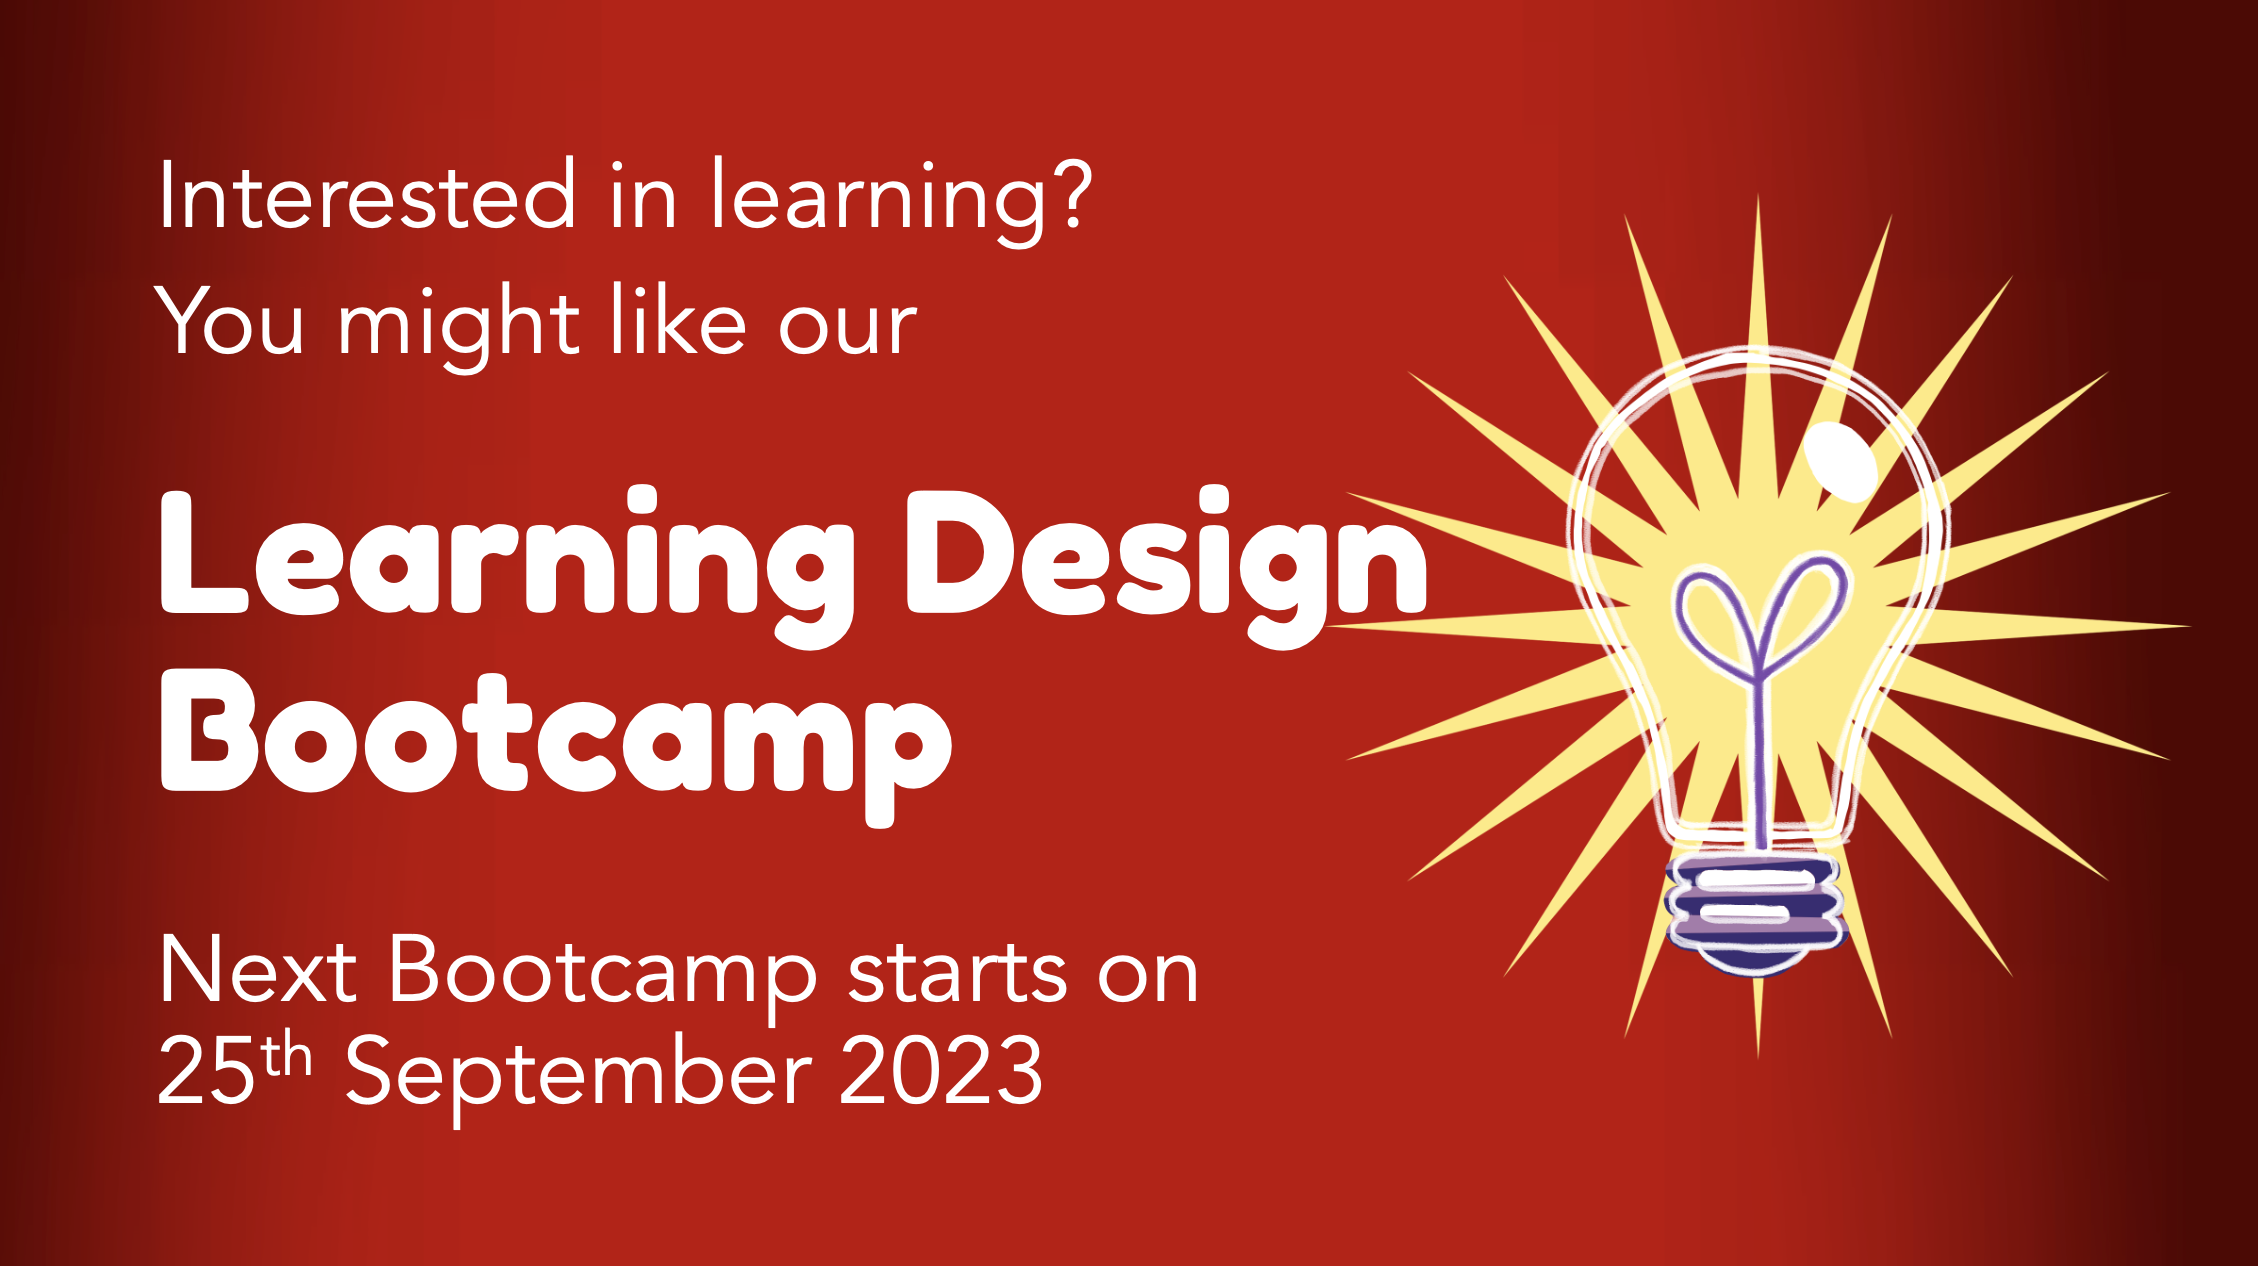 Ding's Learning Design Bootcamp